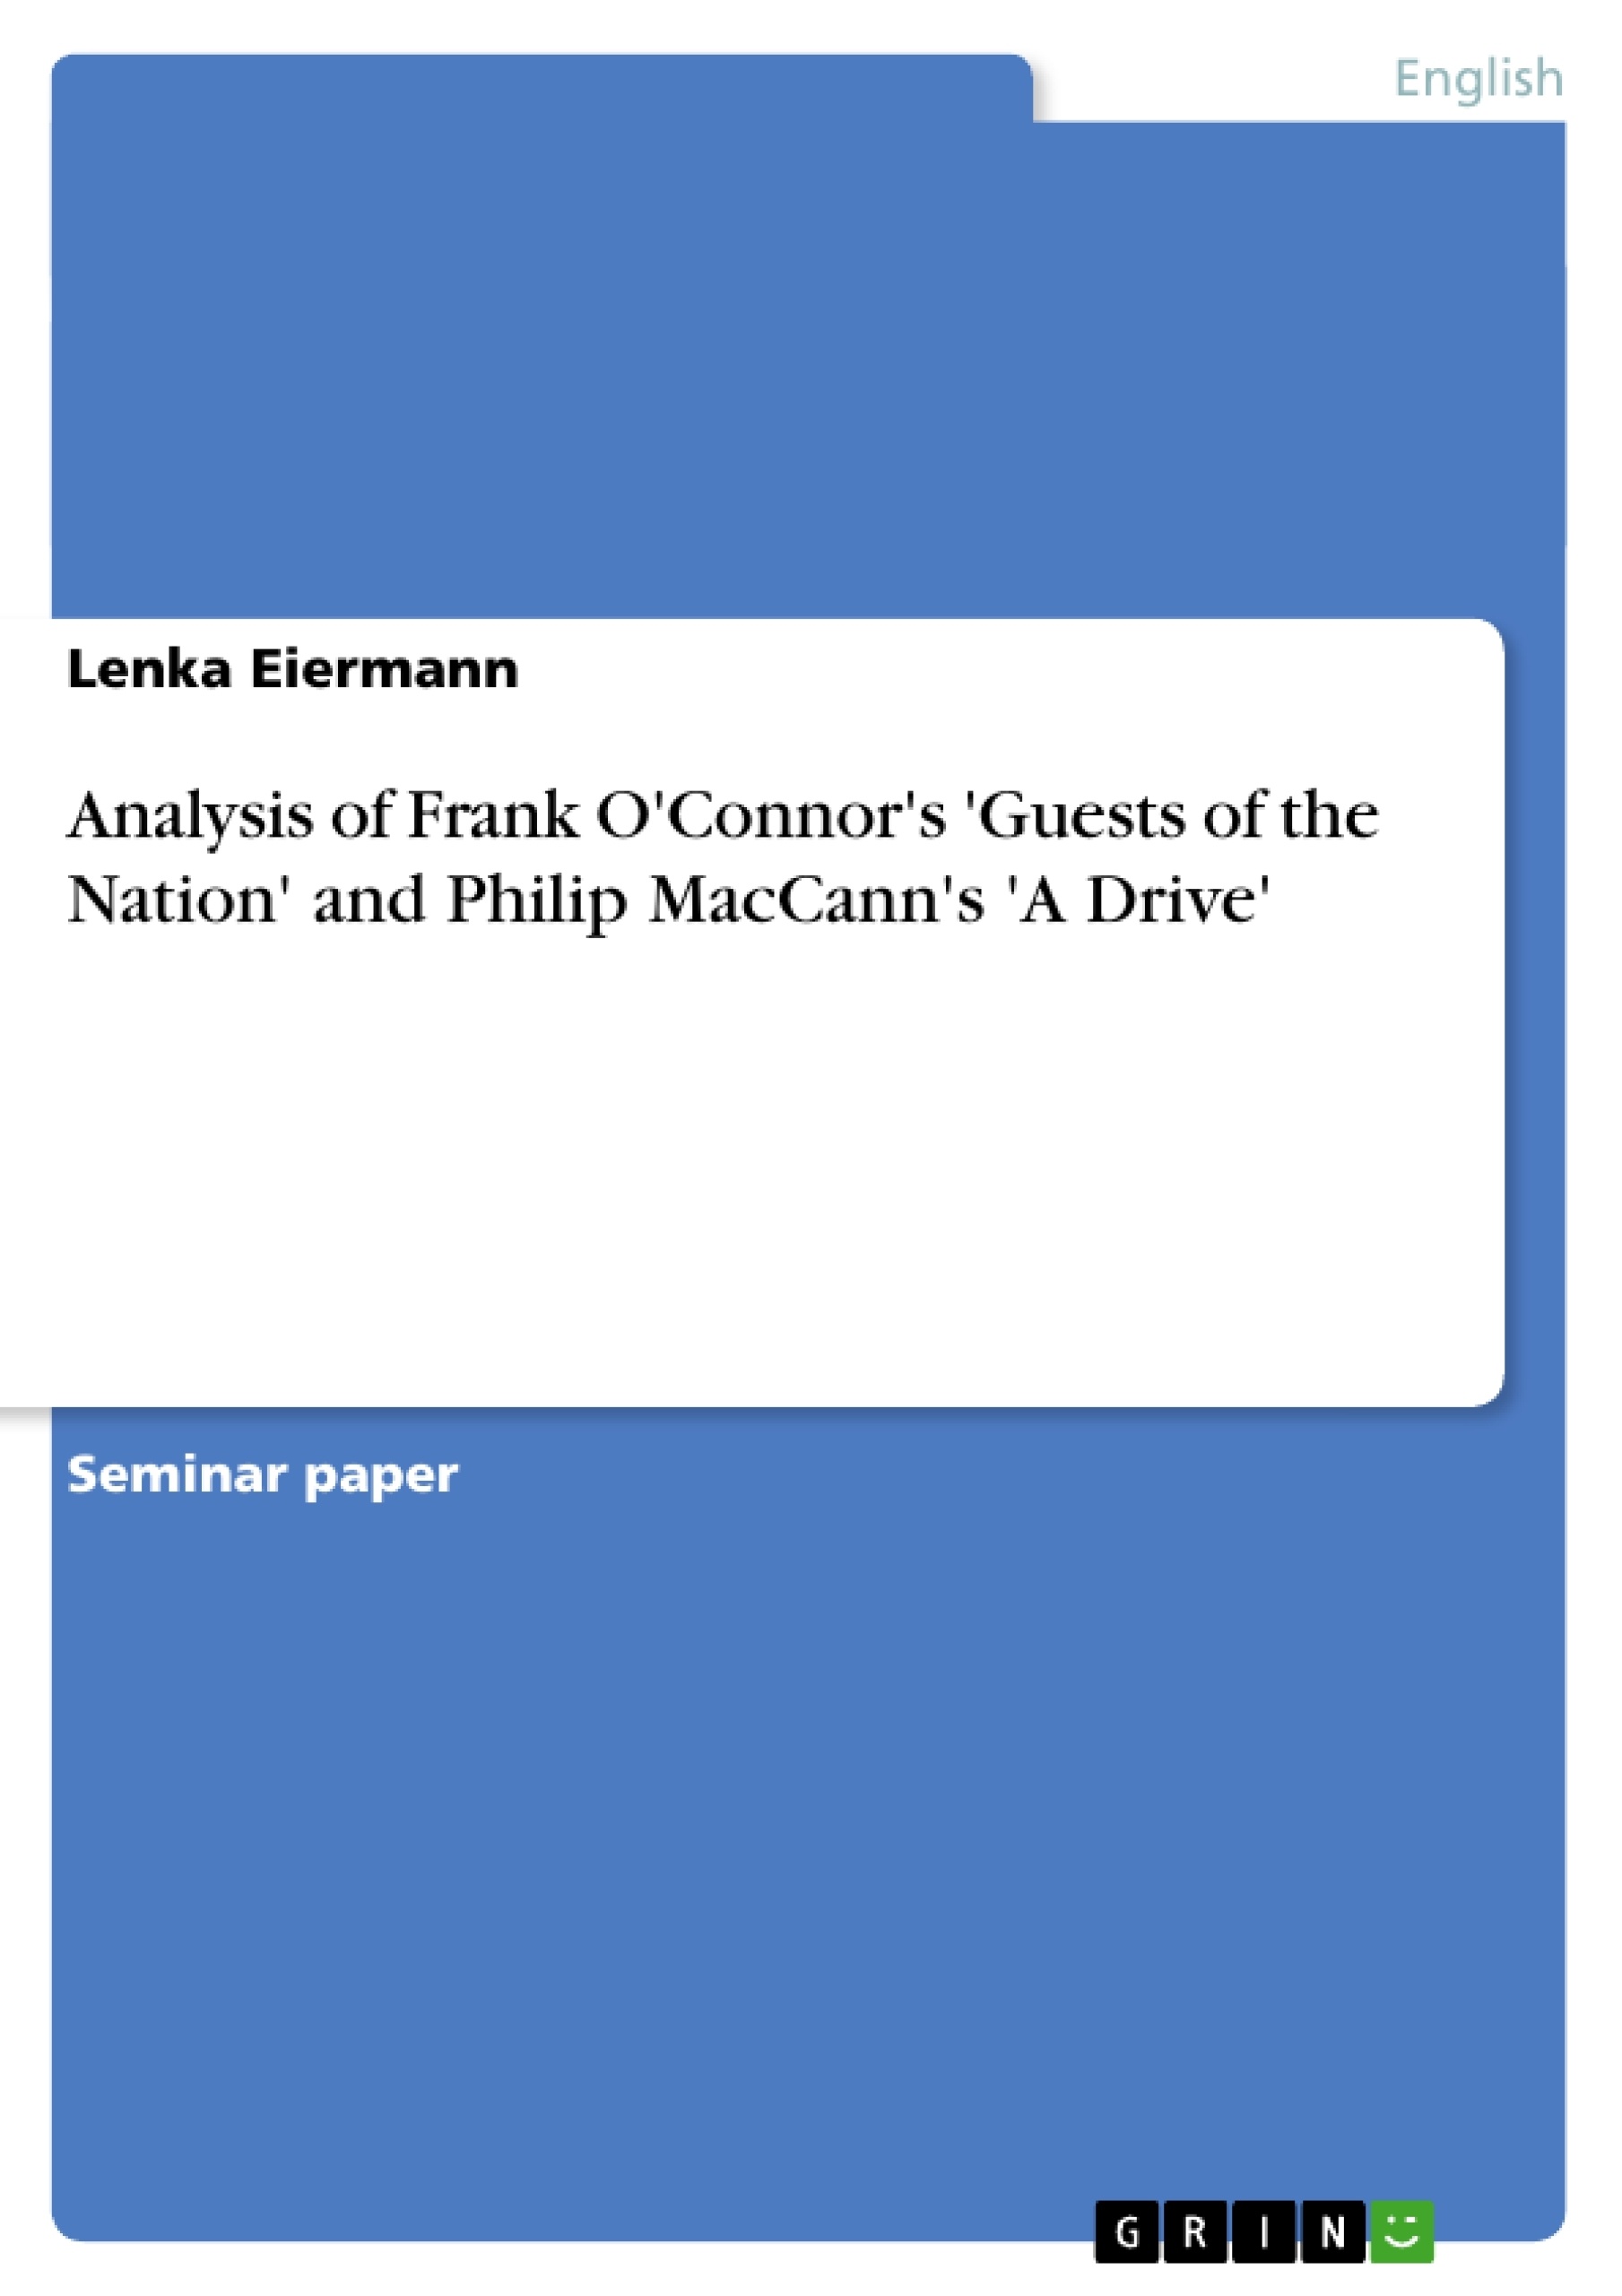 Titel: Analysis of Frank O'Connor's 'Guests of the Nation' and Philip MacCann's 'A Drive'